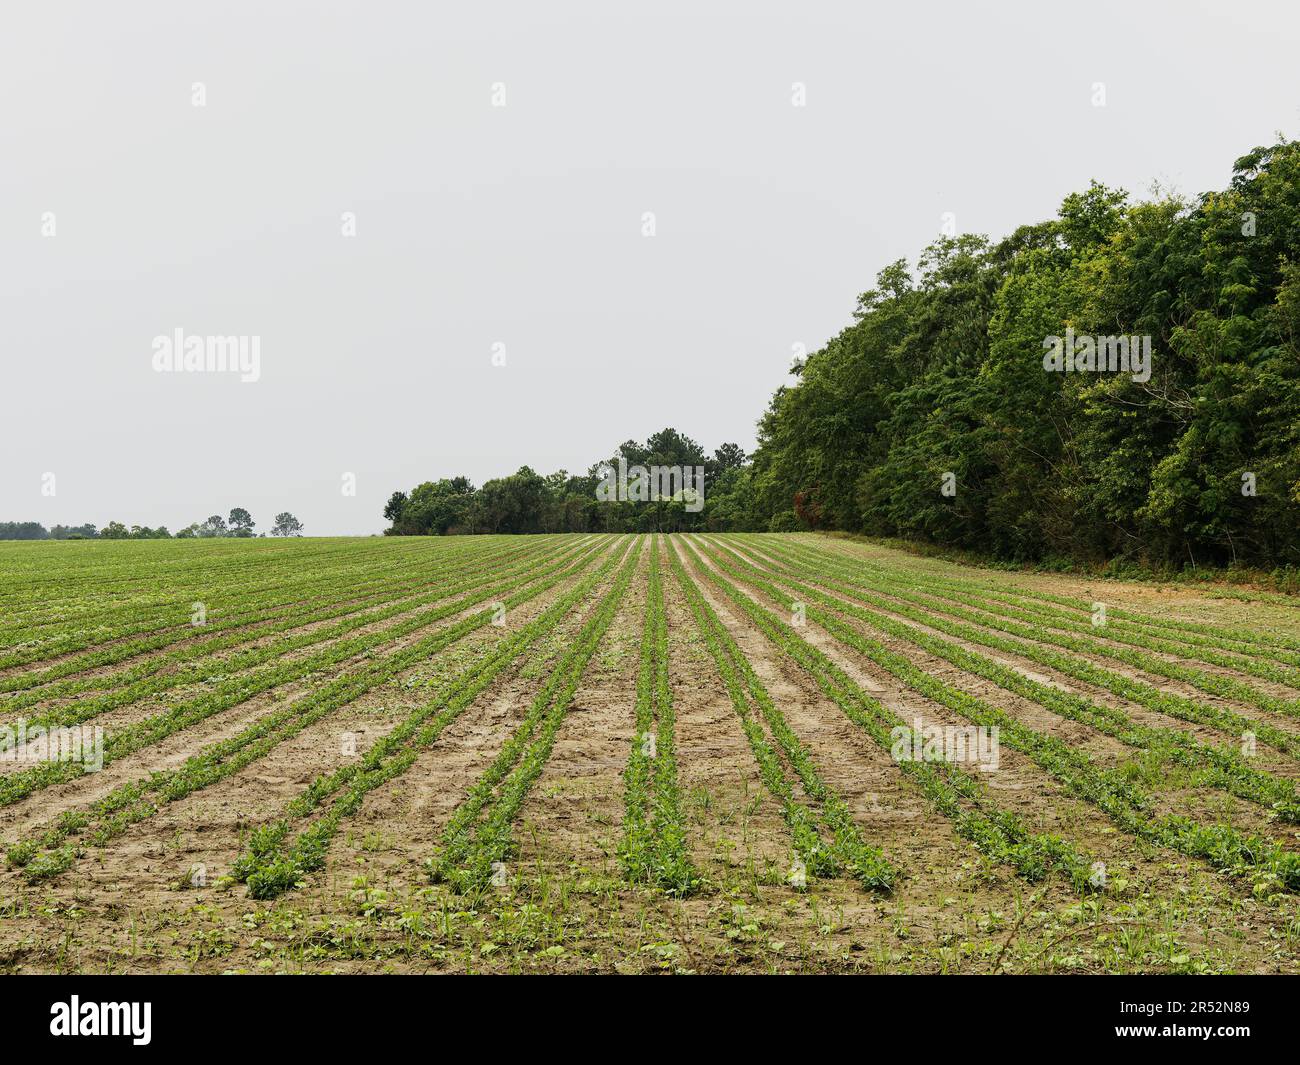 Rows of young vegetables growing in a plowed agriculture field on a farm in South Alabama, USA. Stock Photo